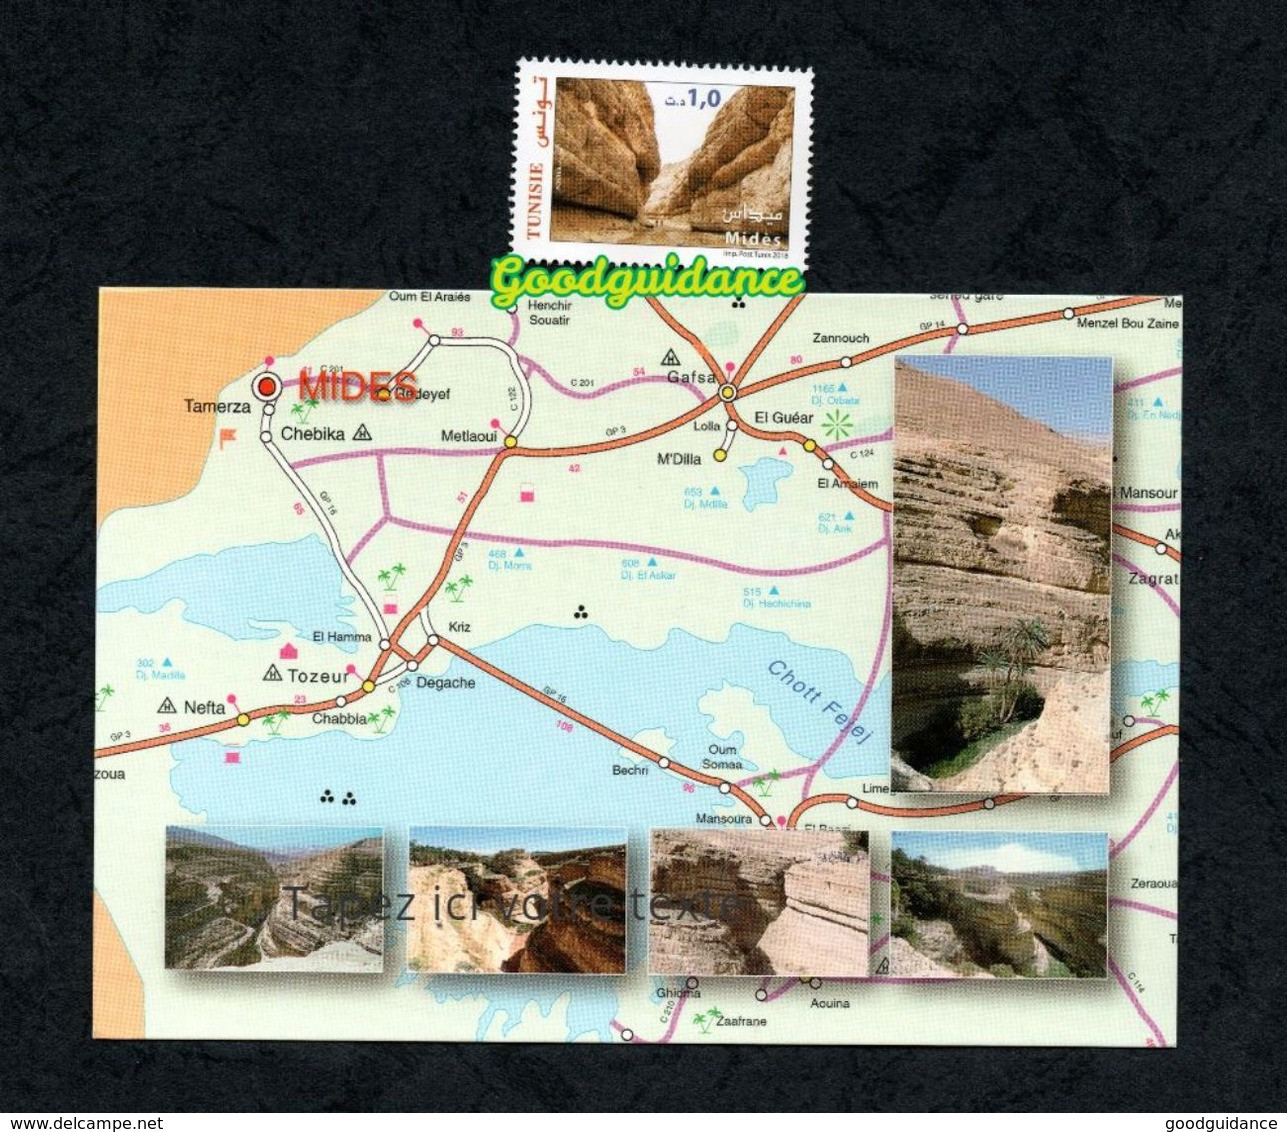 2018- Tunisia- Touristic And Archaeological Sites In Tunisia- Mides Postcard And Stamp MNH** - Archeologie